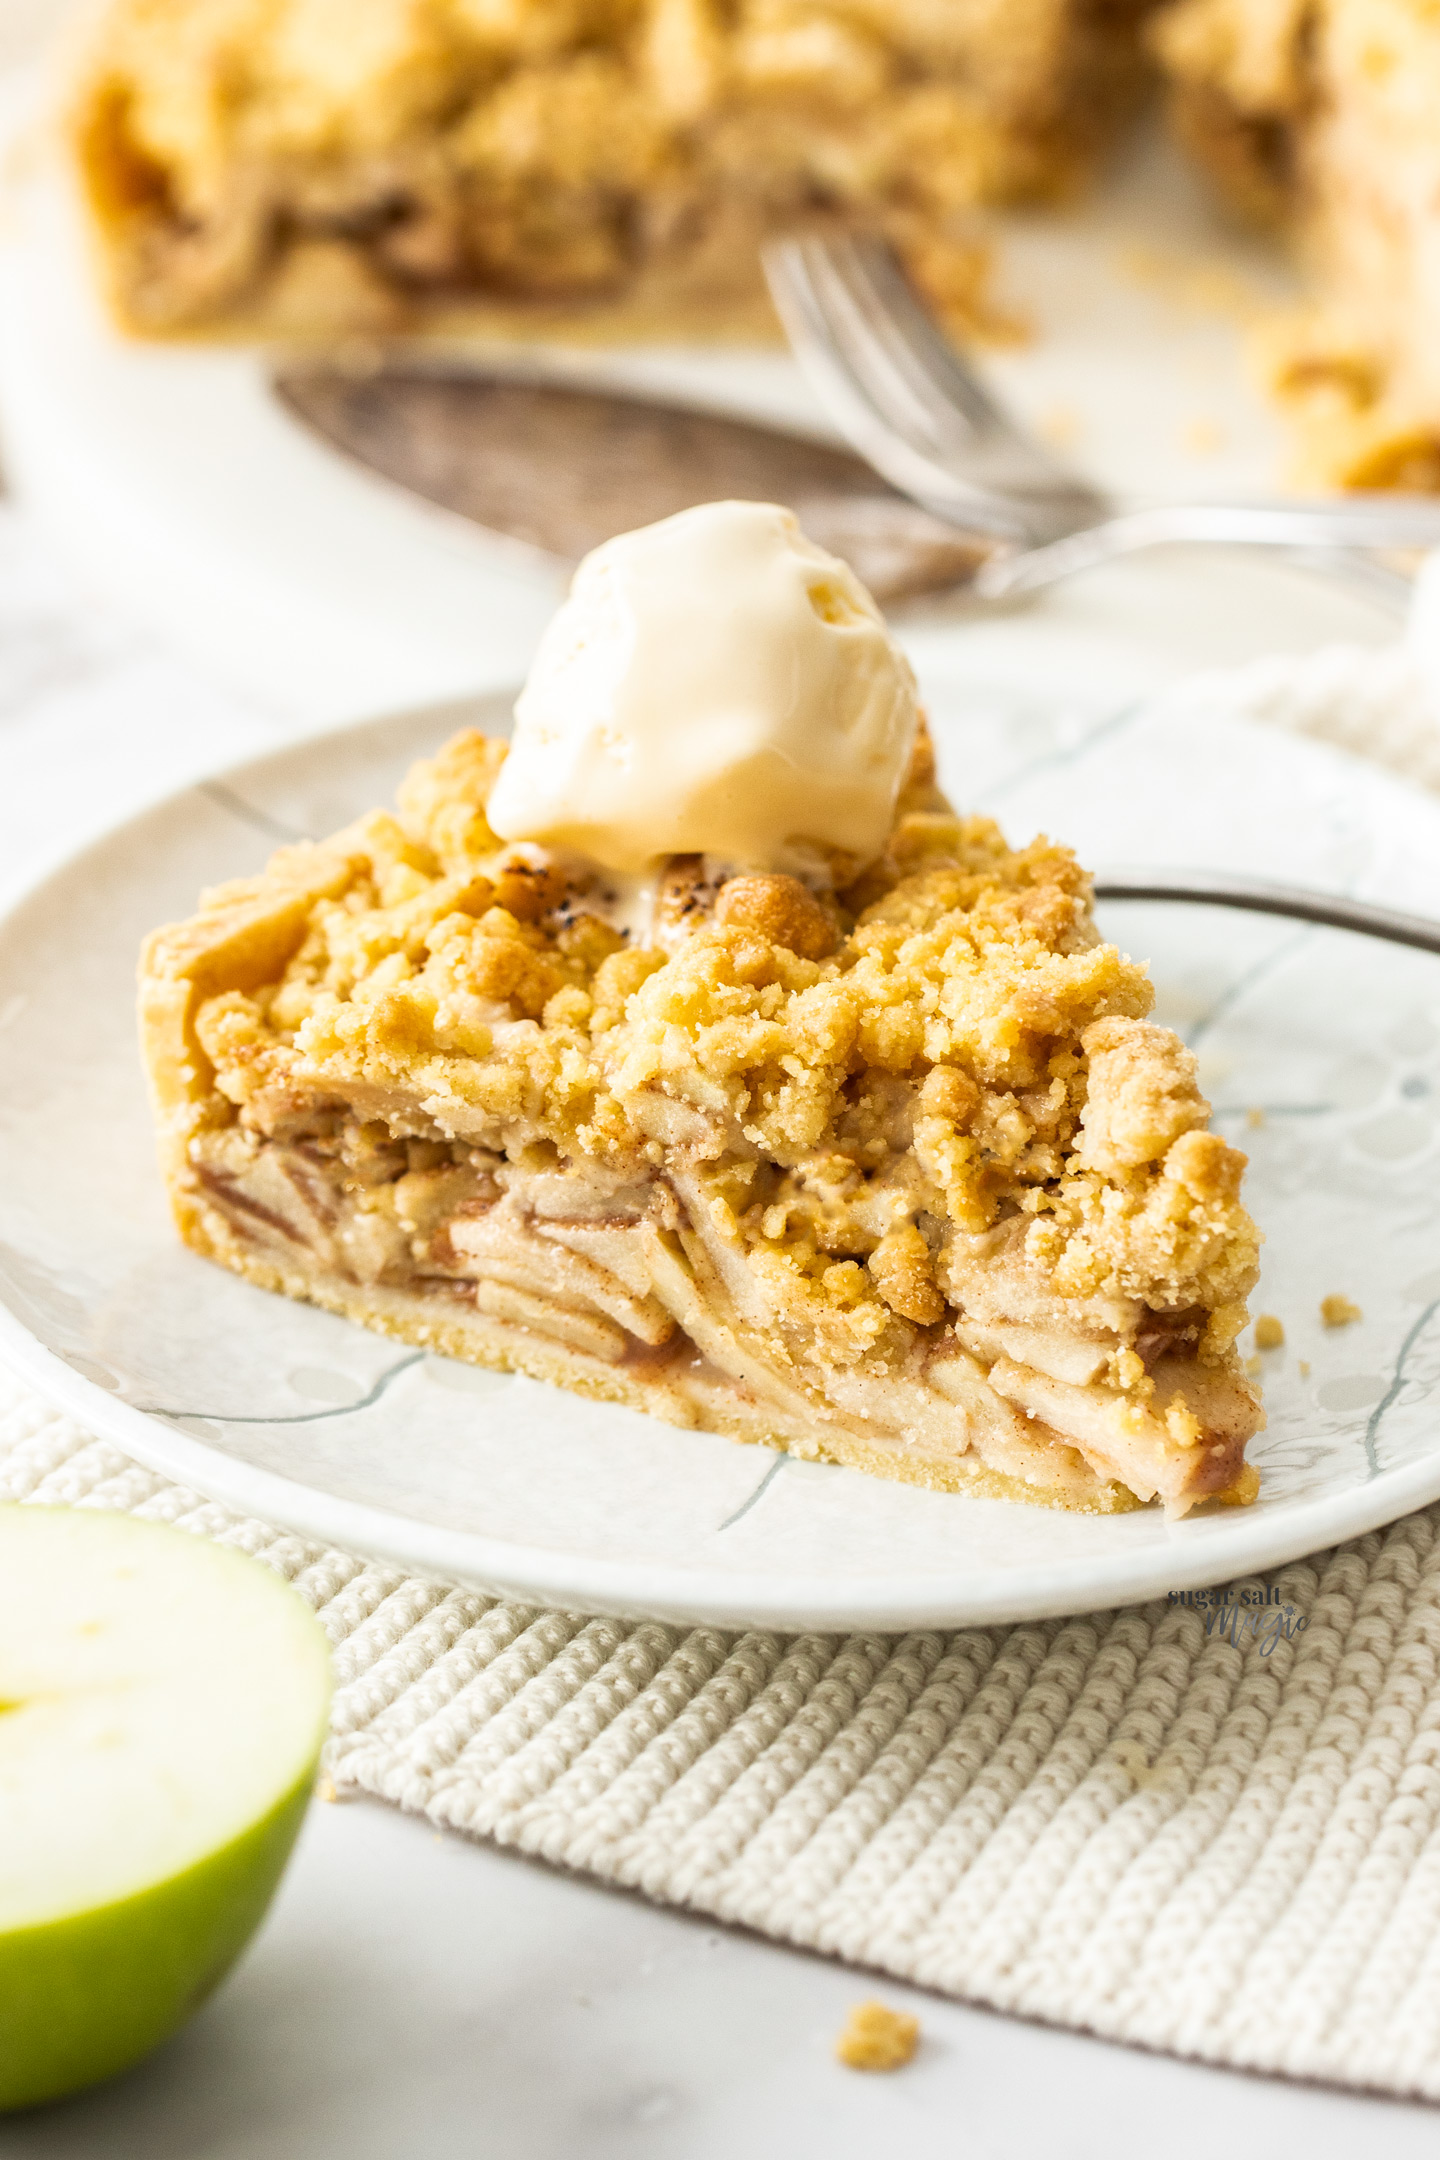 A slice of apple crumble tart topped with ice cream.